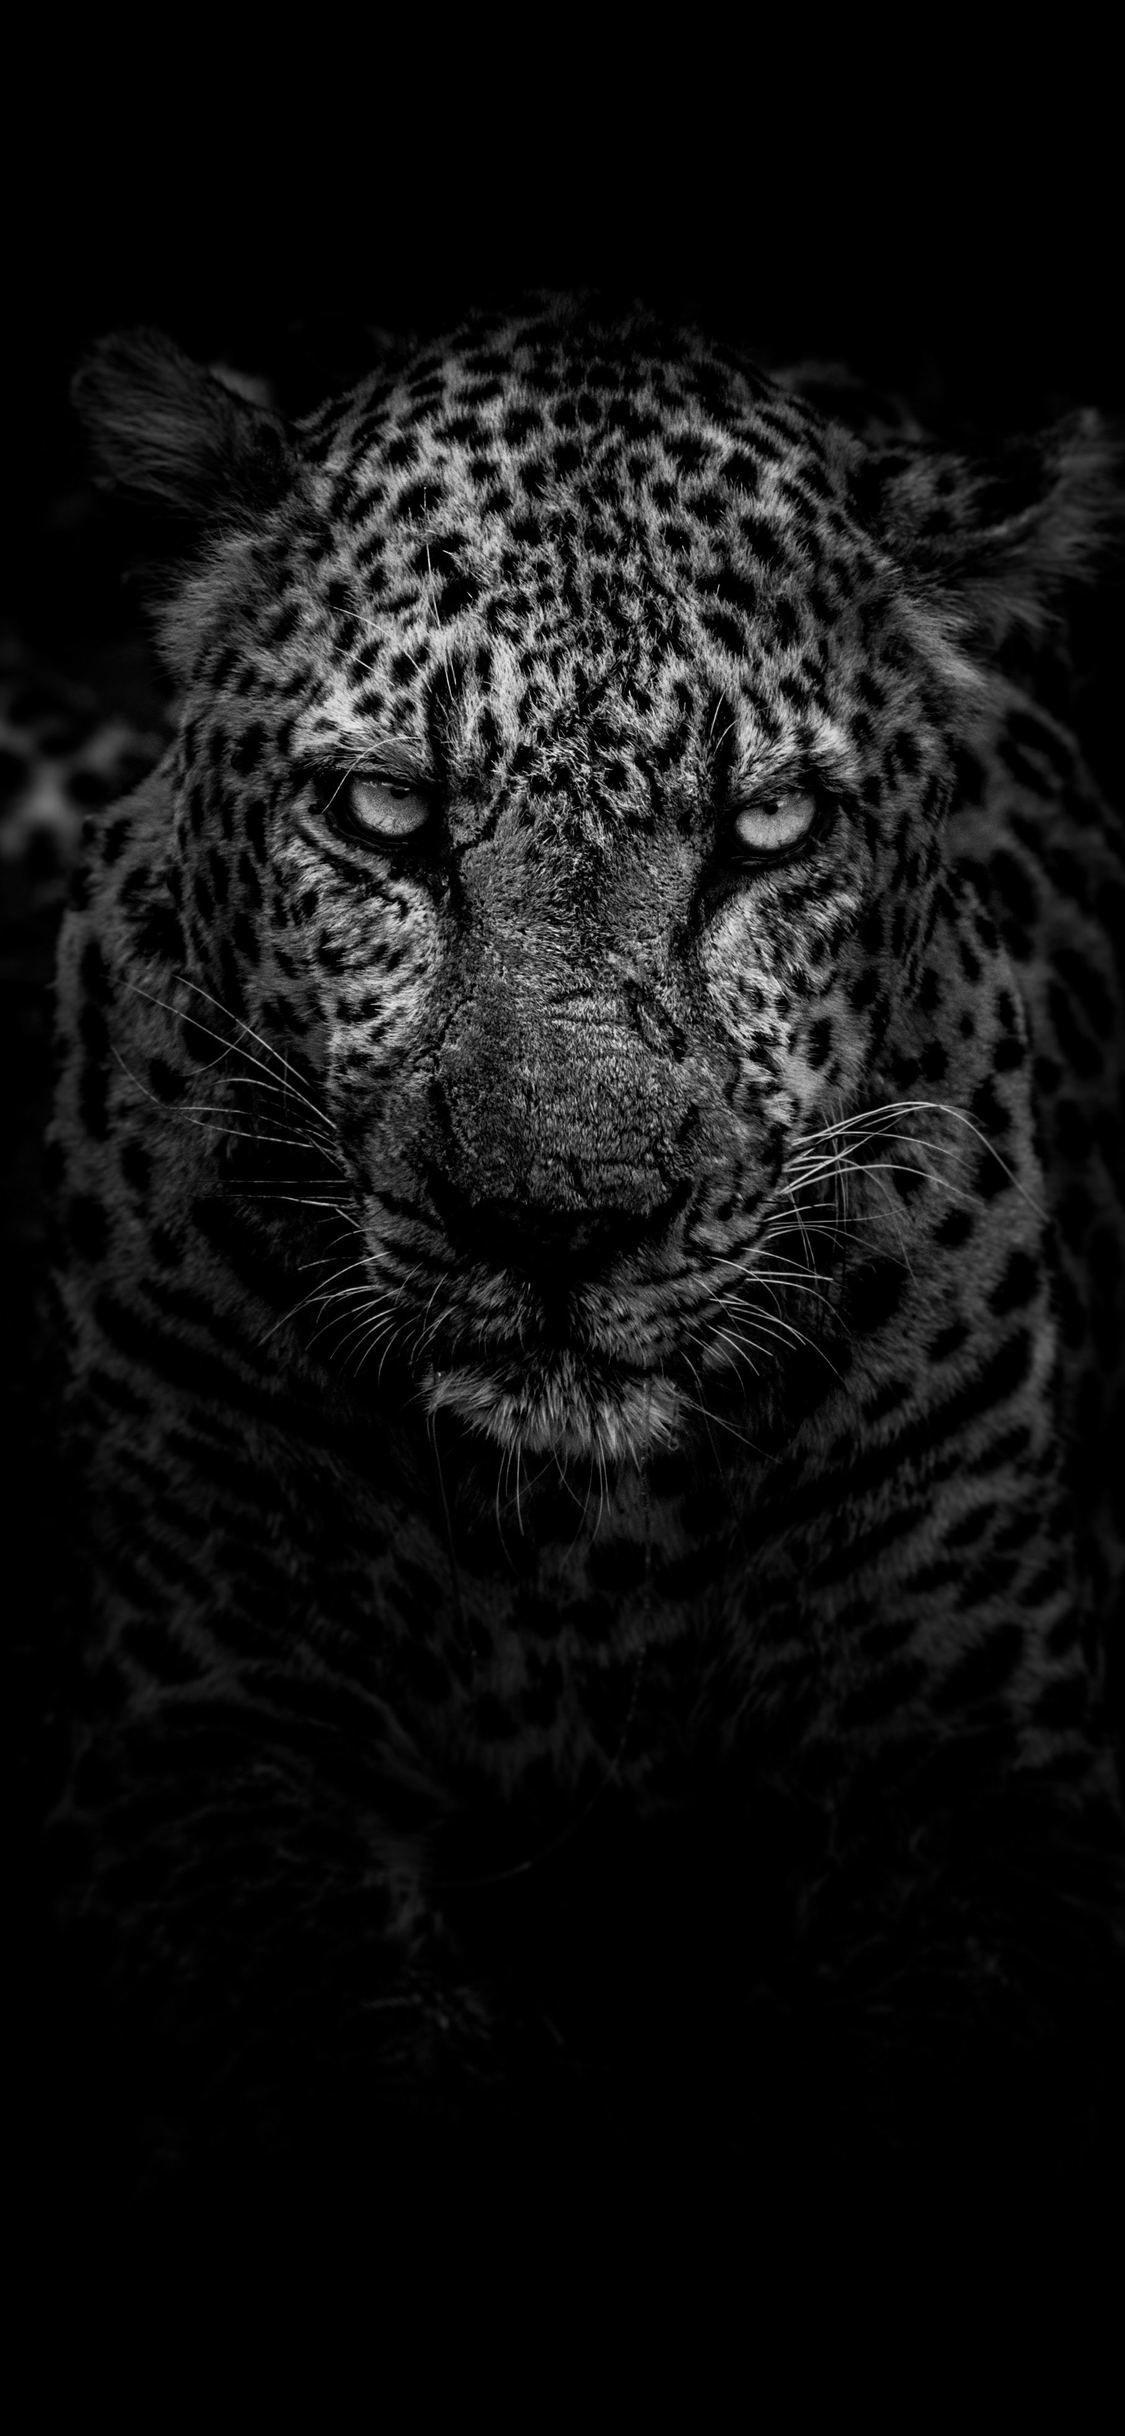 Leopard Iphone Wallpapers Top Free Leopard Iphone Backgrounds Wallpaperaccess